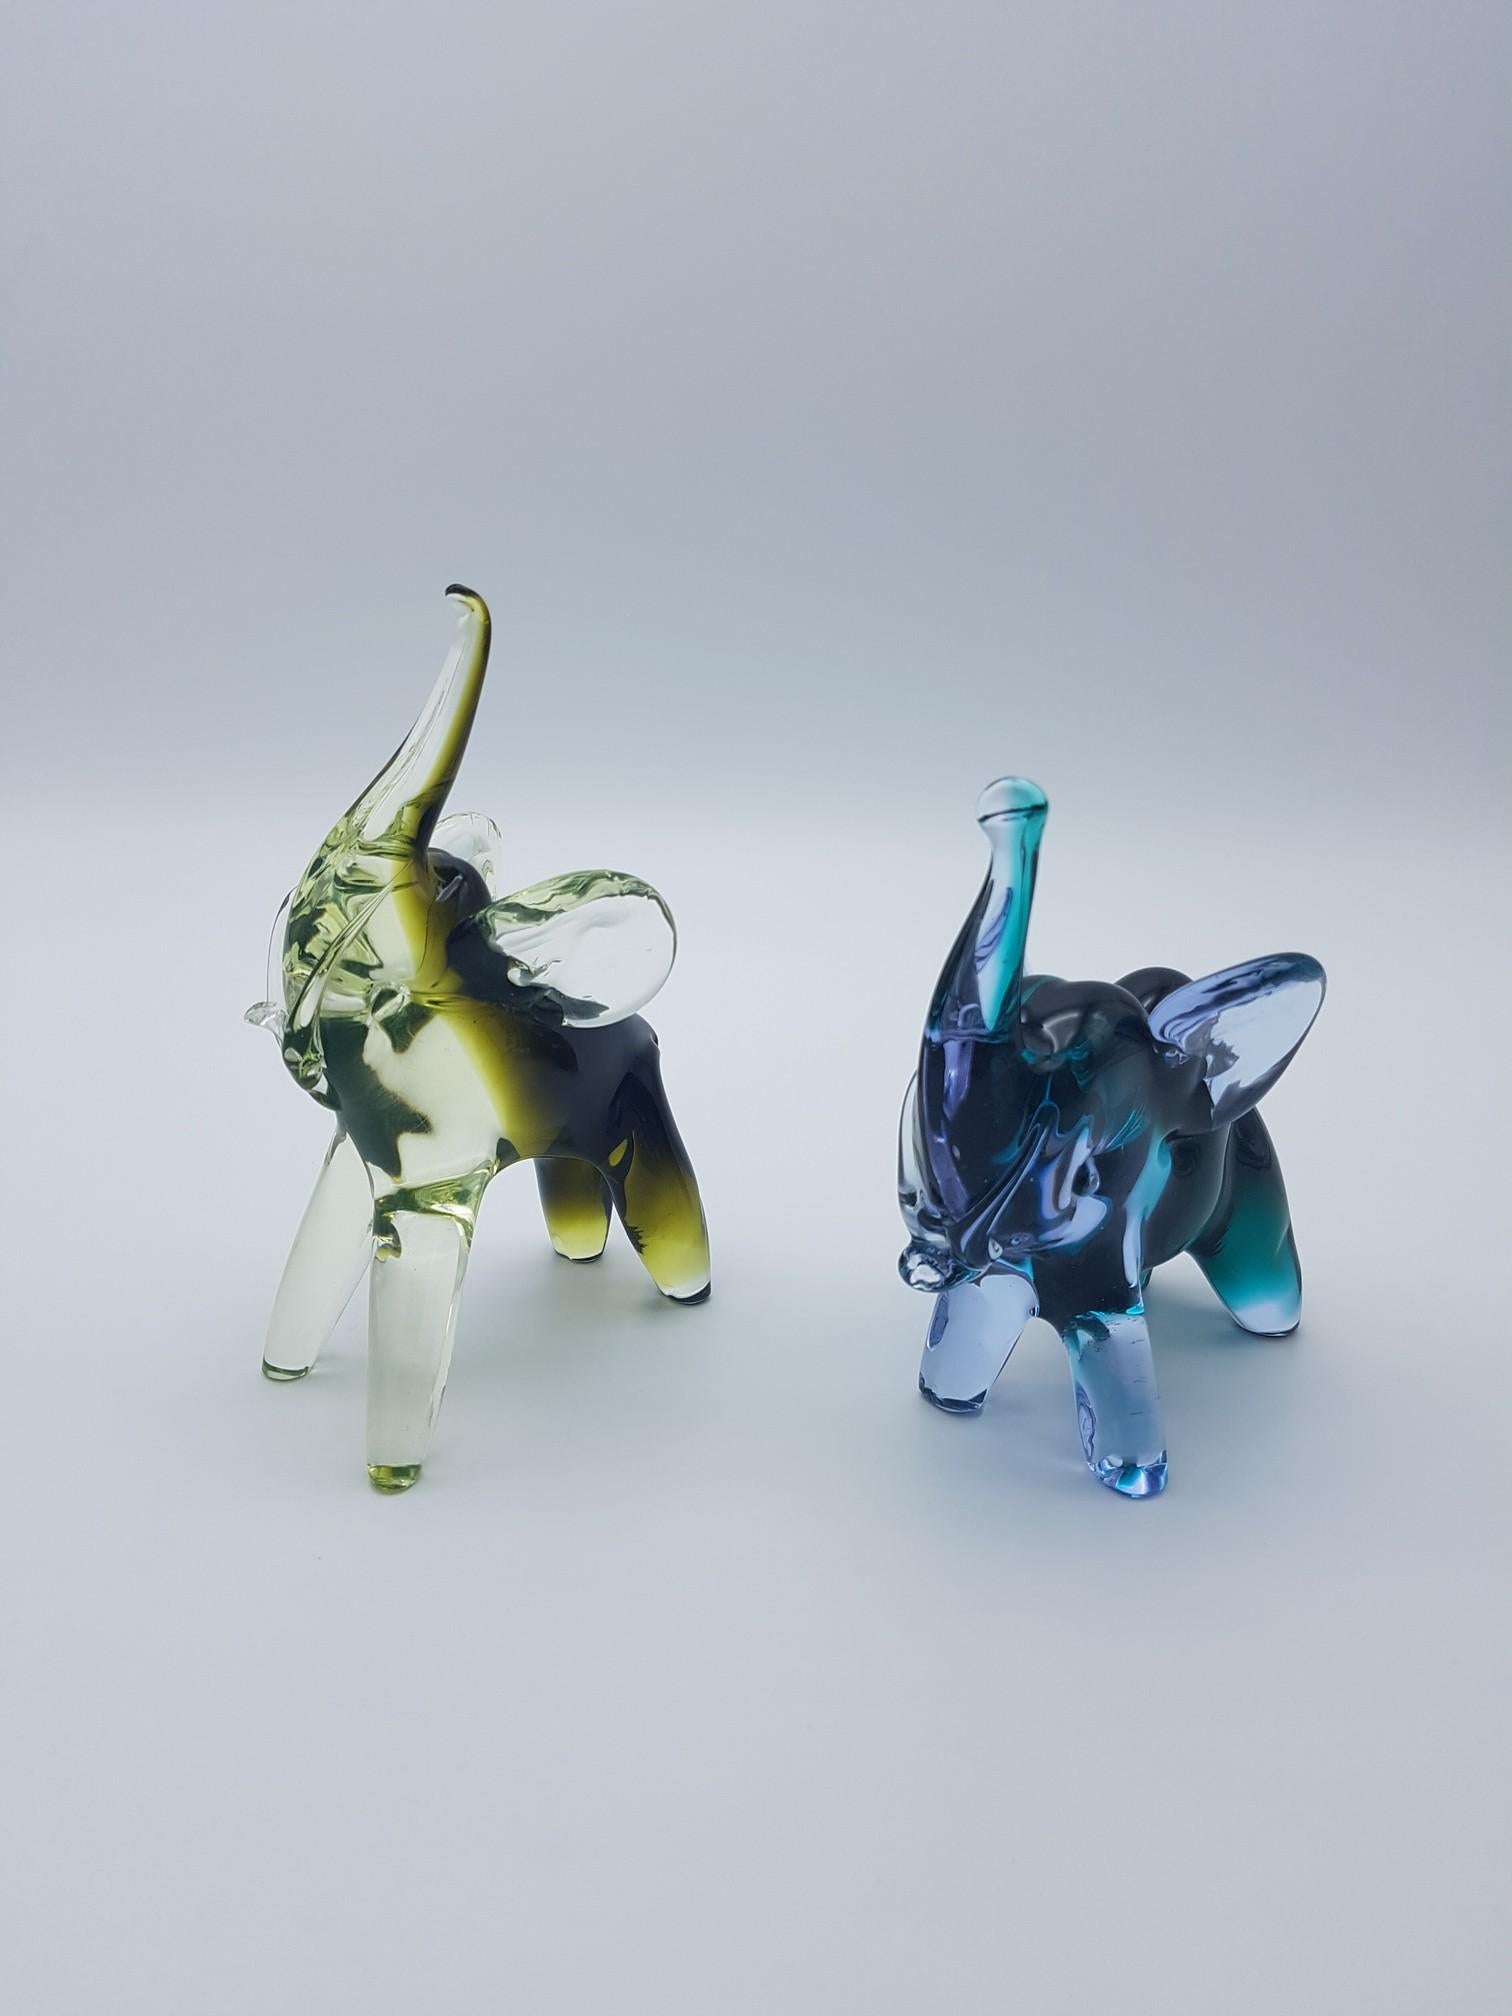 Pair of cute Murano glass elephants handmade by Gino Cenedese e Figlio in the late 1970s. One elephant is made in lavdner and green color, while the pther is yellow and military green, a color scheme quite popular in the 1970s. Both elephants are